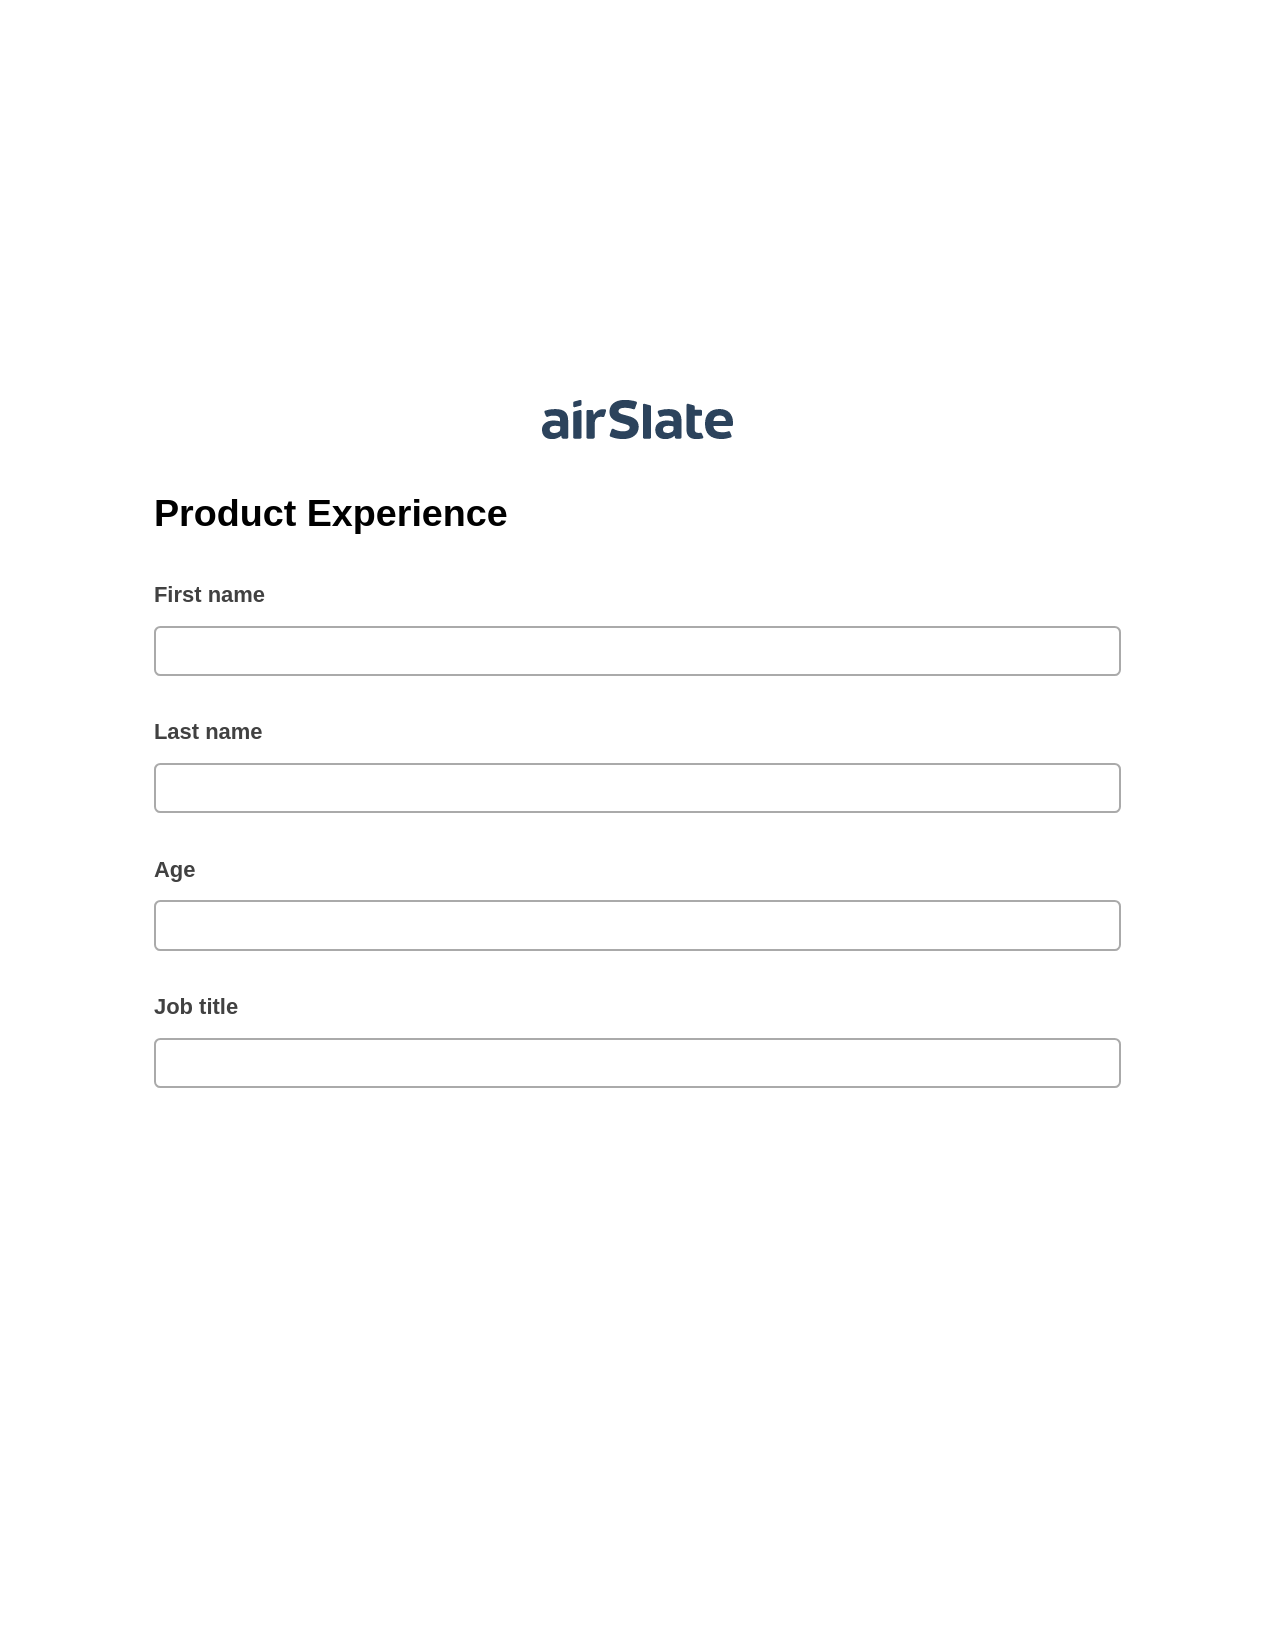 Product Experience Pre-fill from CSV File Bot, Create NetSuite Record bot, Export to Salesforce Record Bot